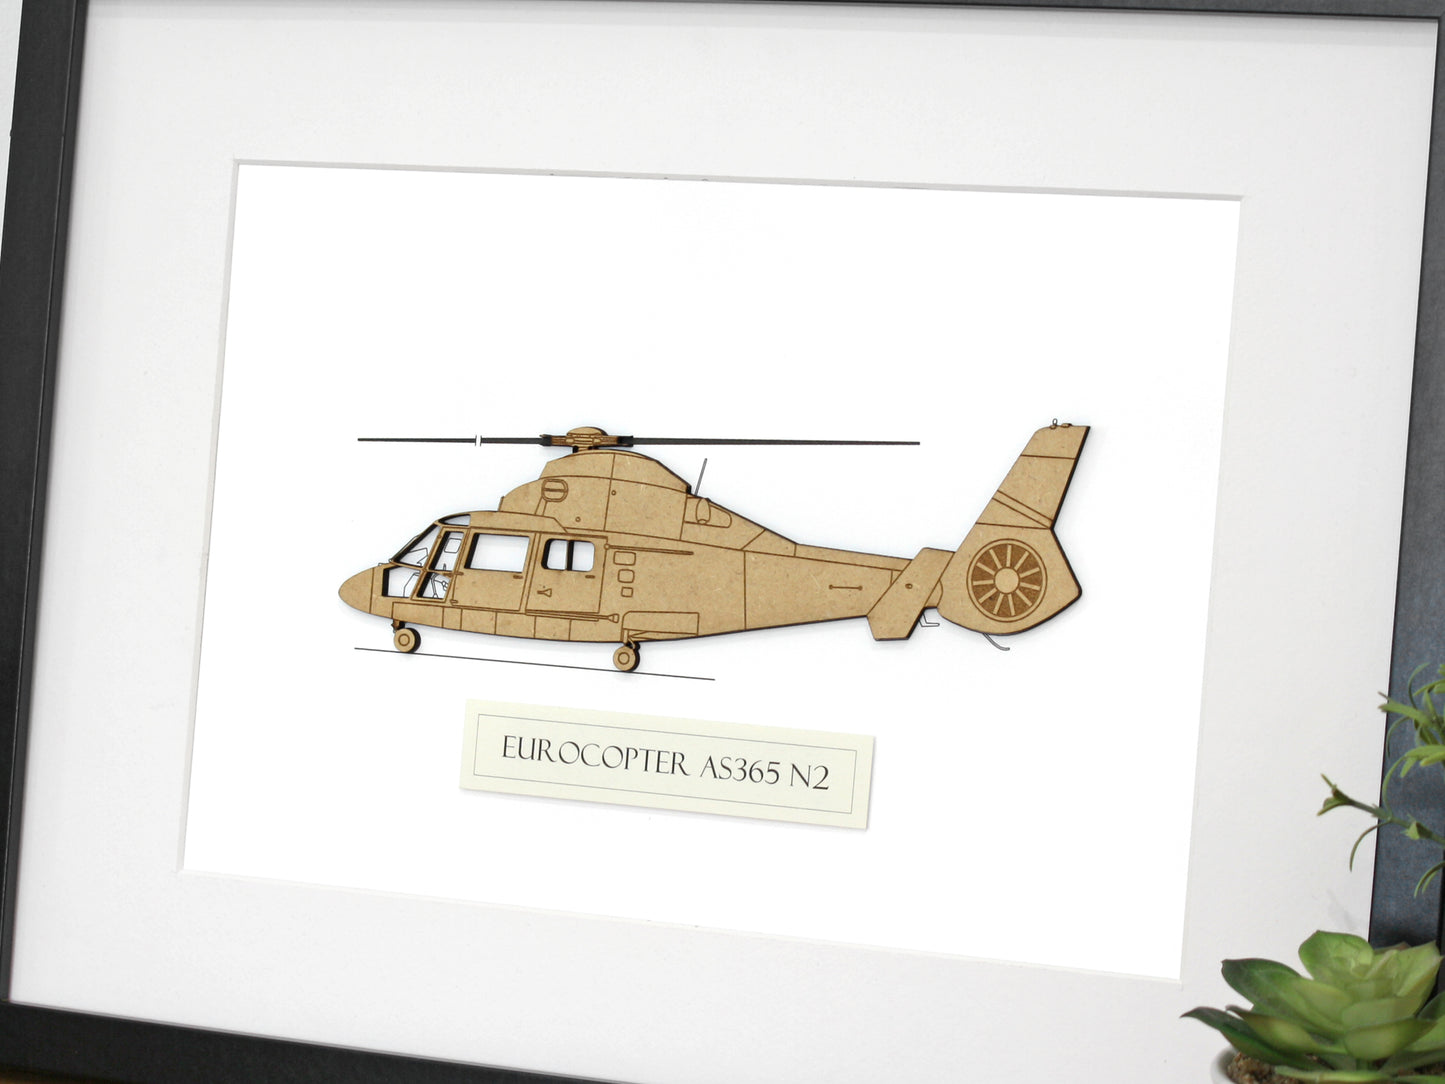 Eurocopter AS365 N2 helicopter gifts